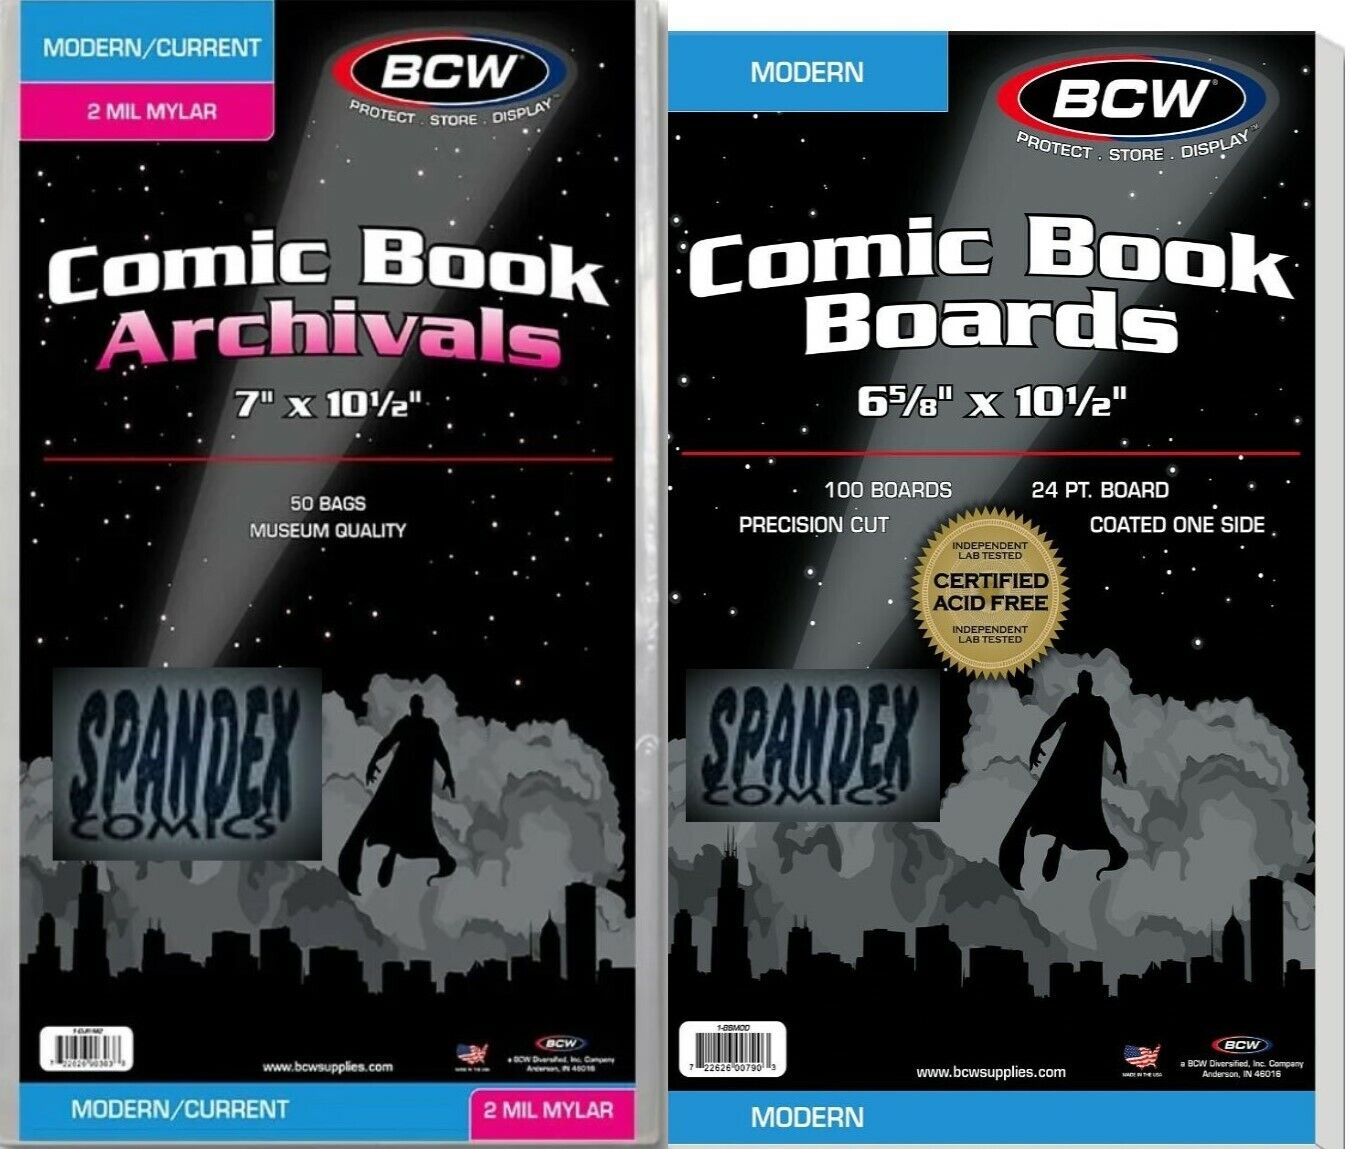 100 BCW Current Modern 2-Mil Mylar Archival\'s Comic Bags +100 BCW Modern Boards